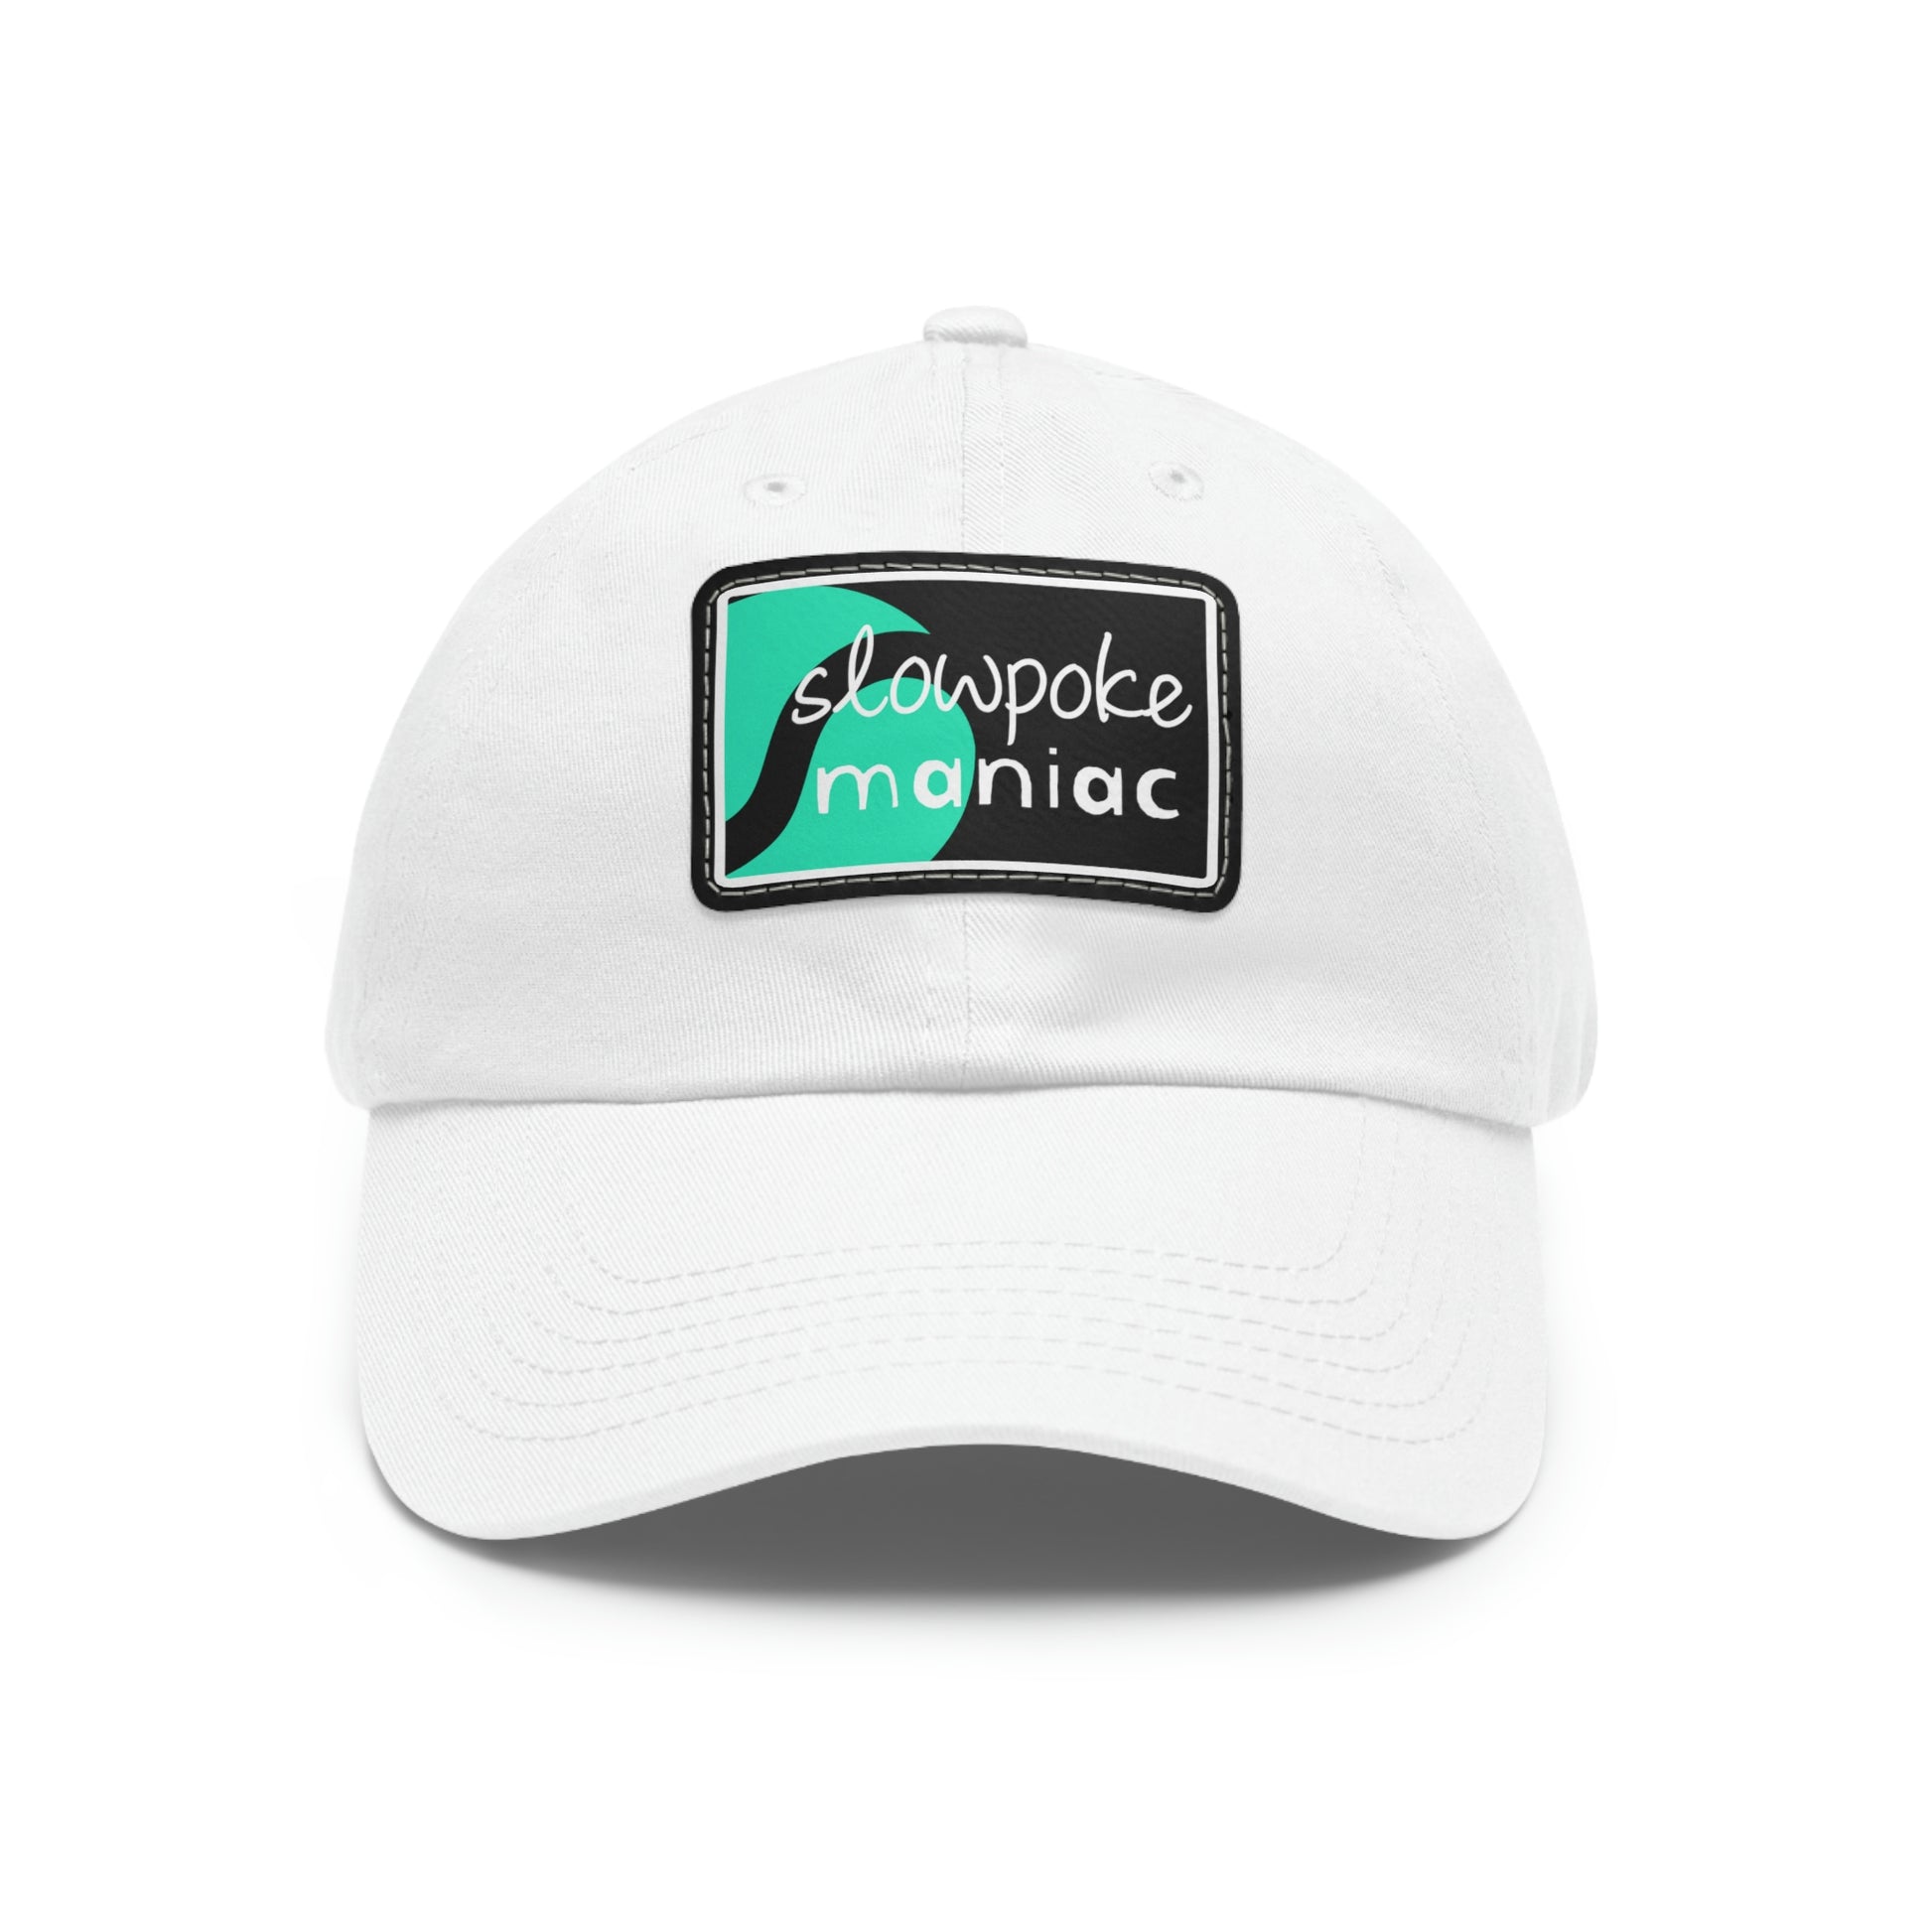 Miami Vibes Cap White / Black patch Rectangle One size